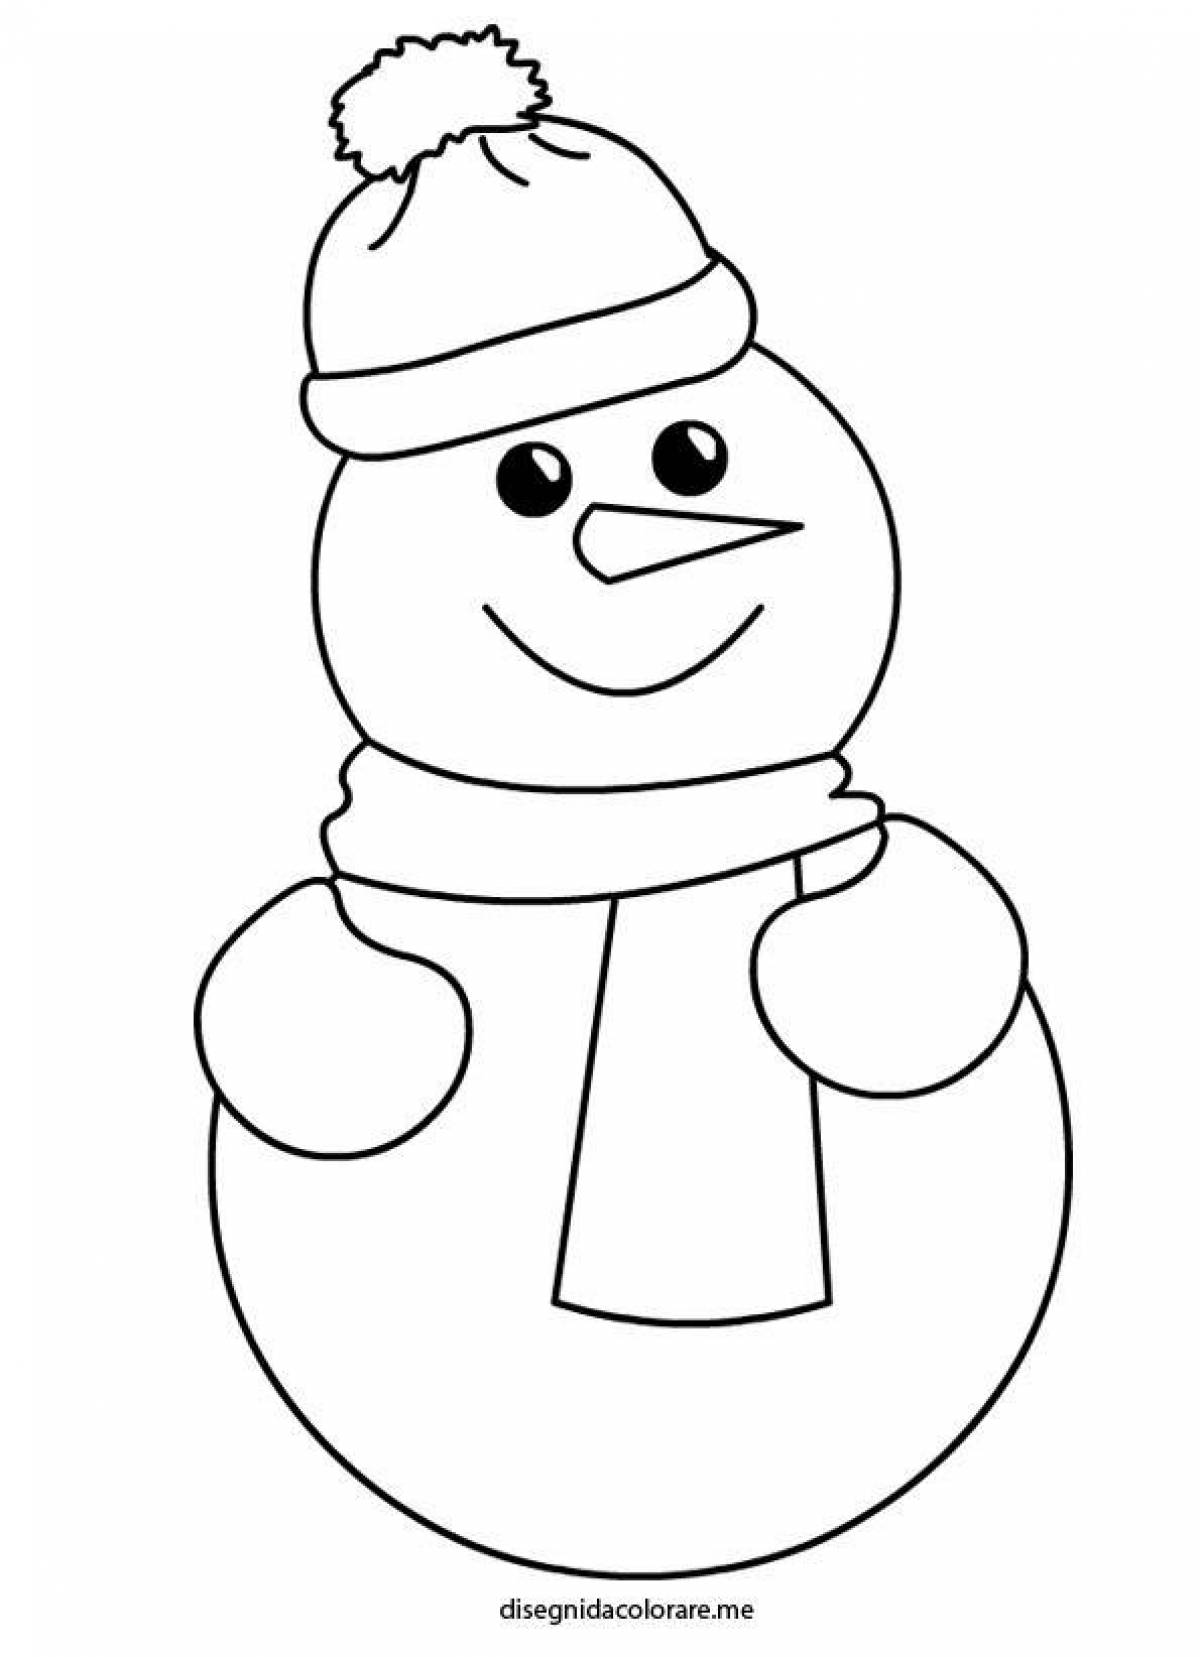 Naughty snowman coloring page for kids